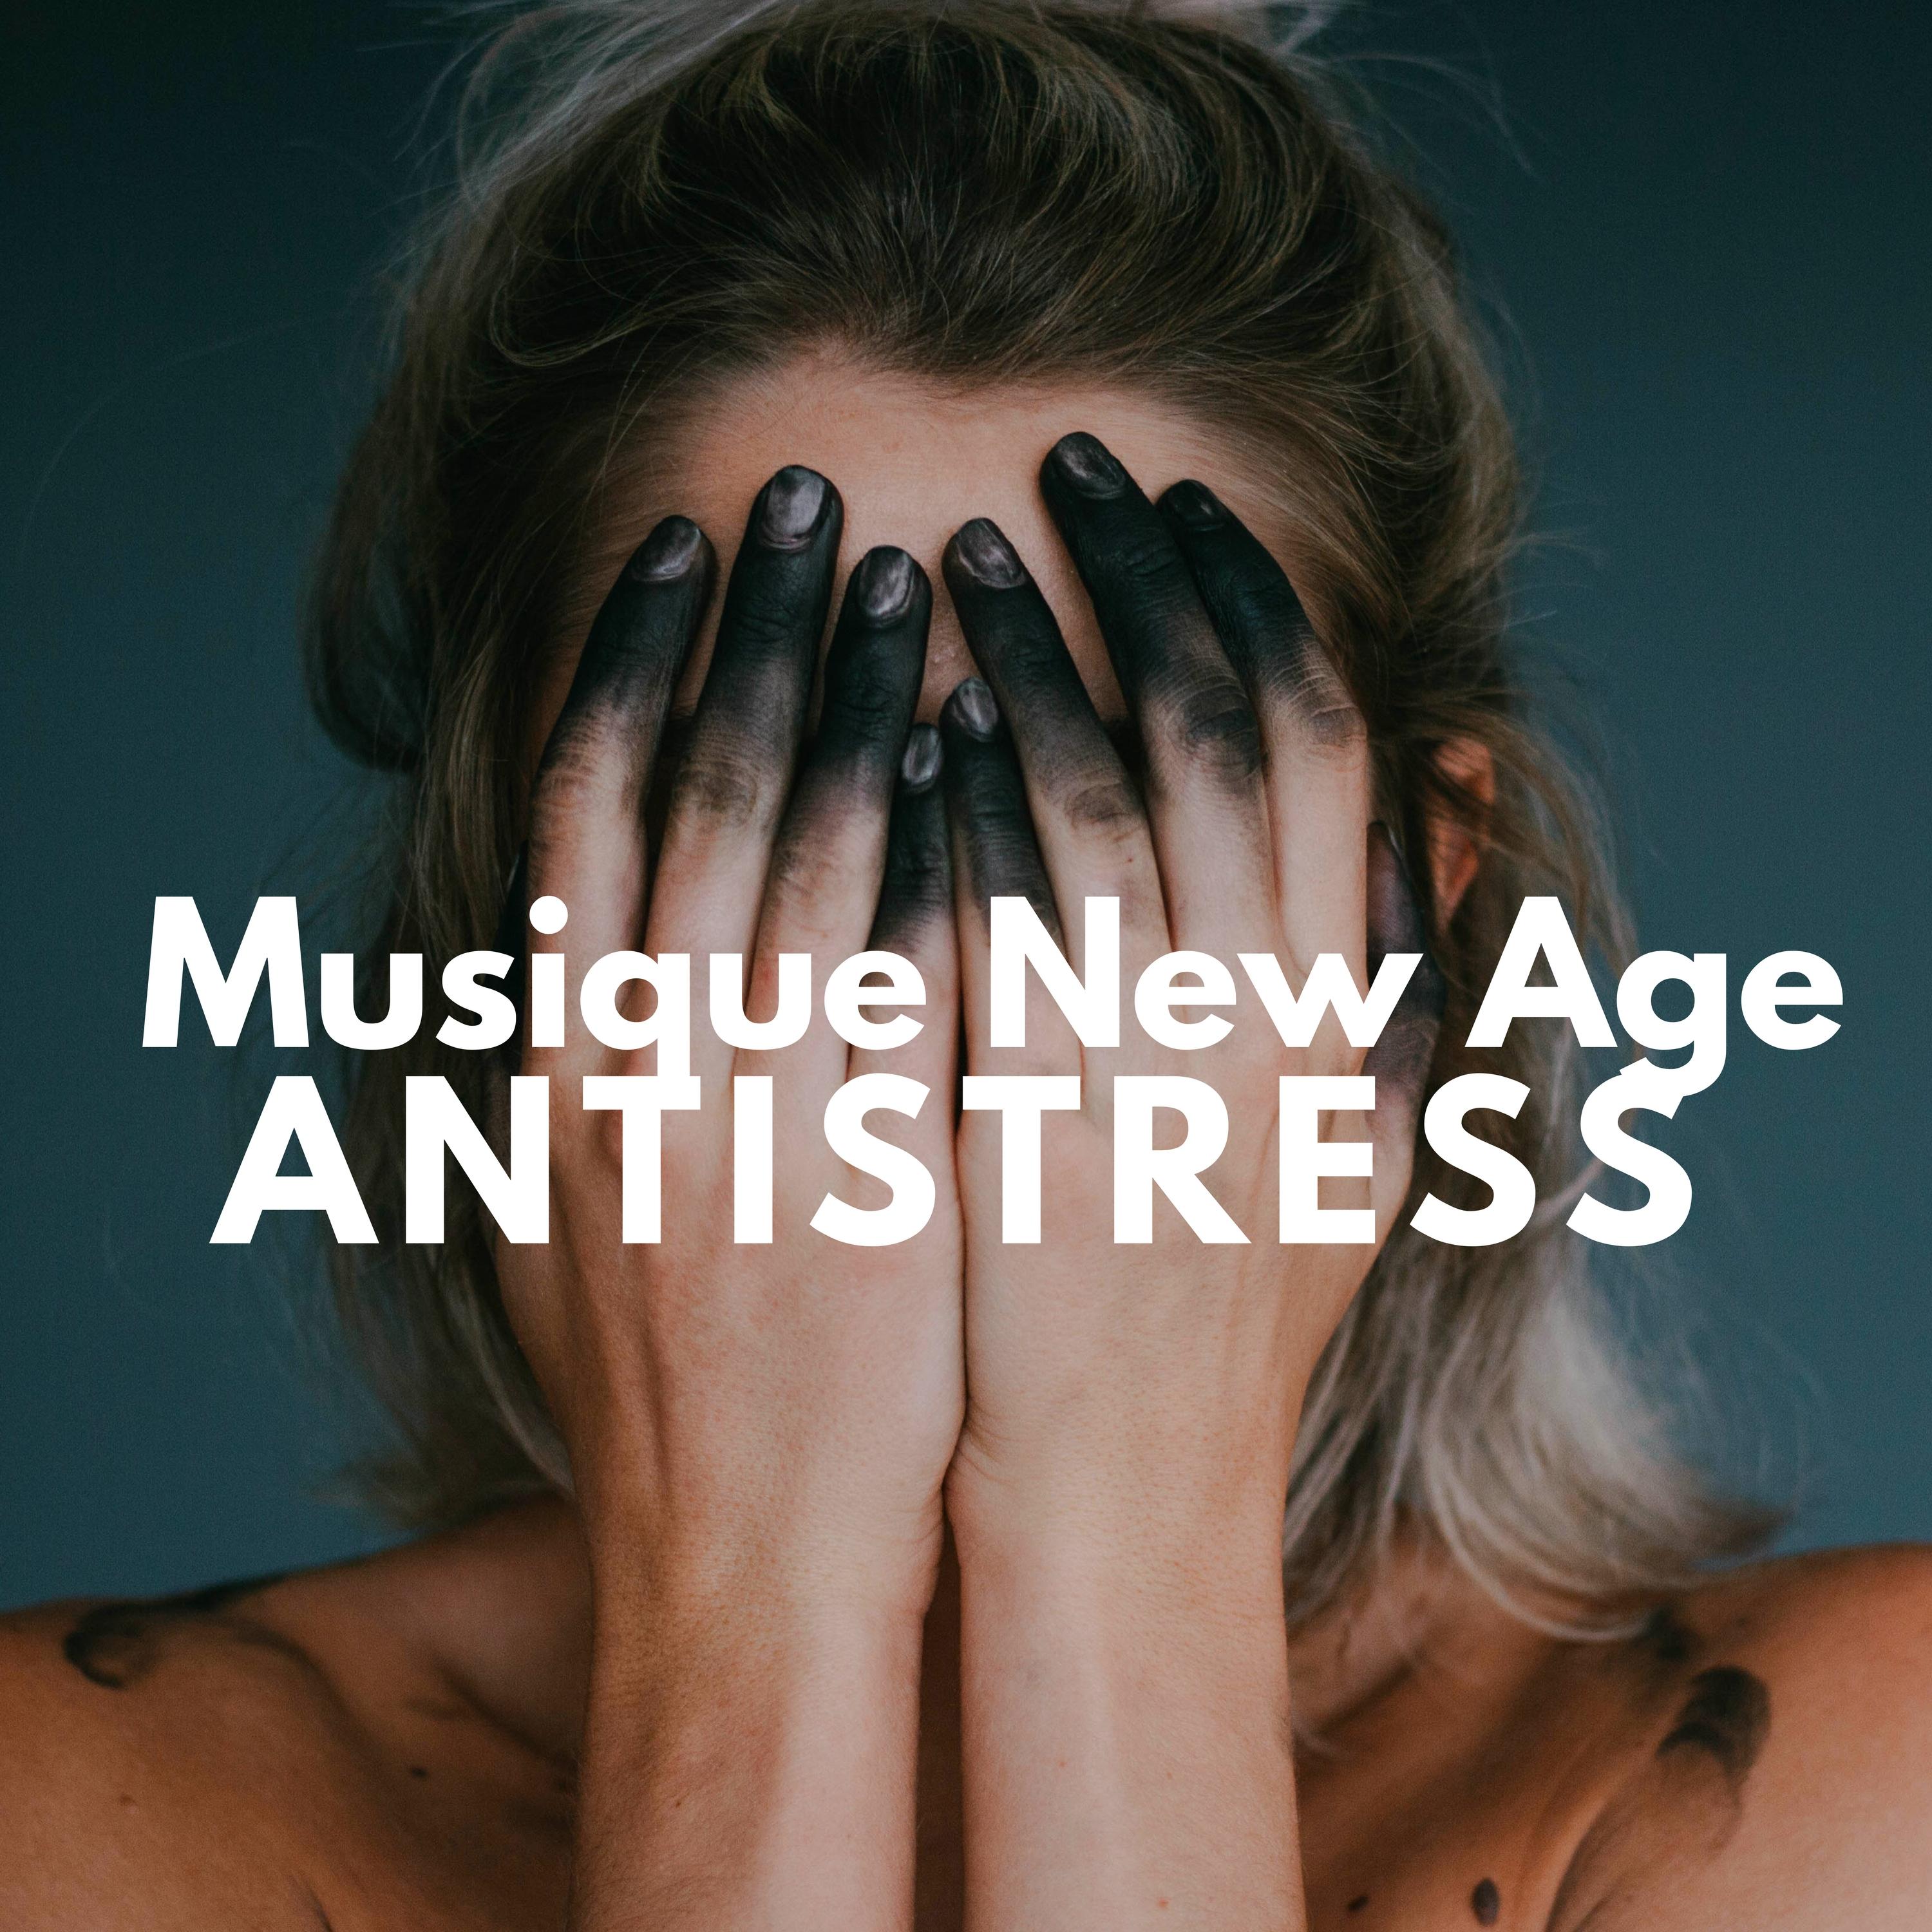 Musique New Age Antistress